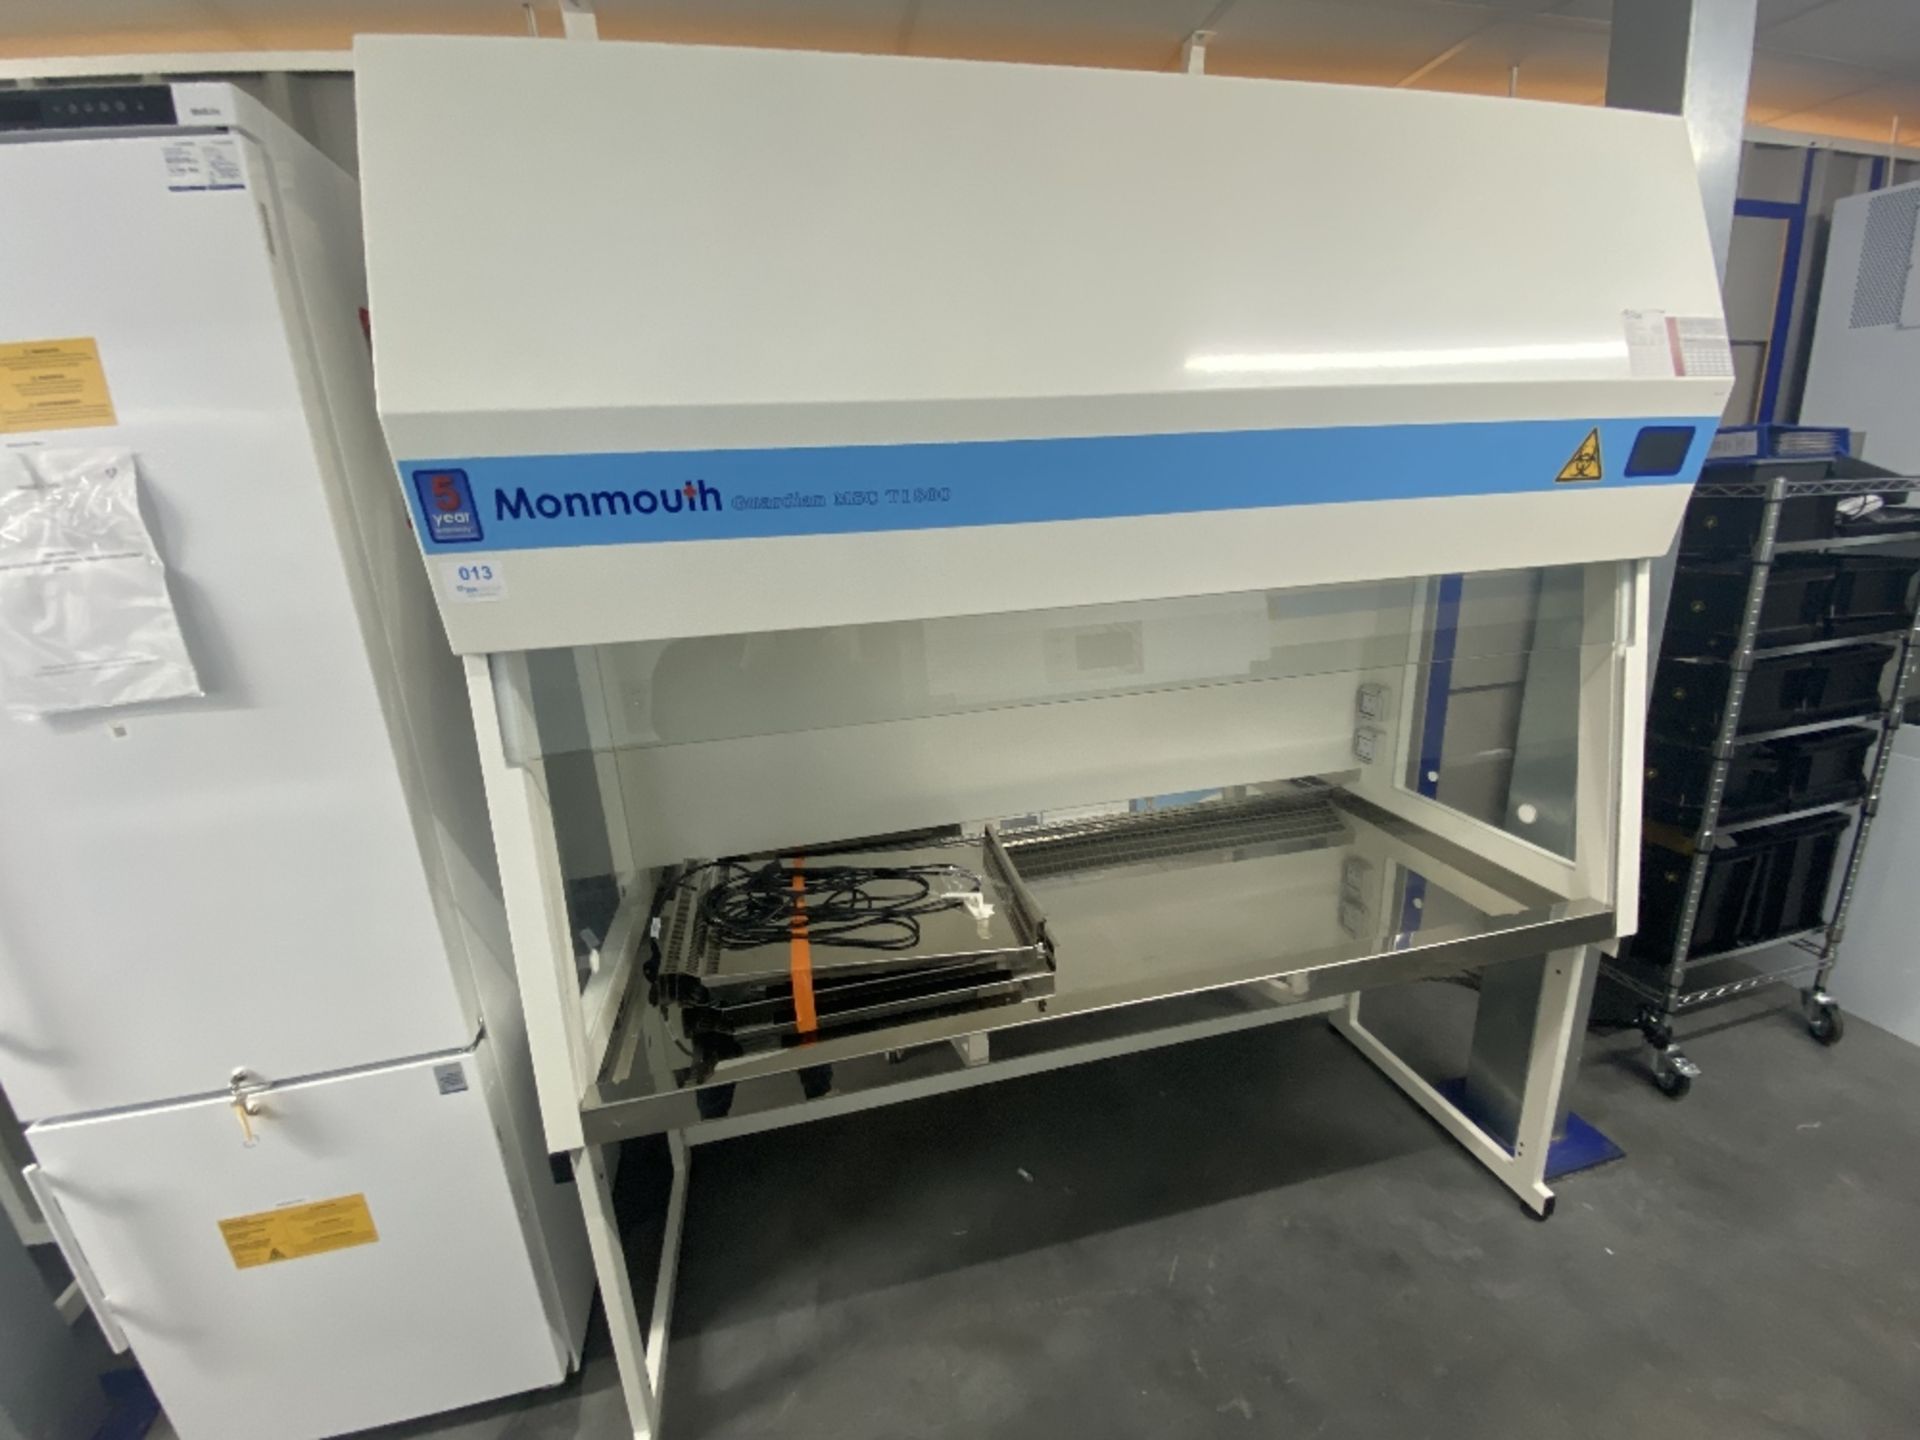 Monmouth Guardian MSC T1800 Microbiological Safety Cabinet with Base Stand - Image 5 of 5